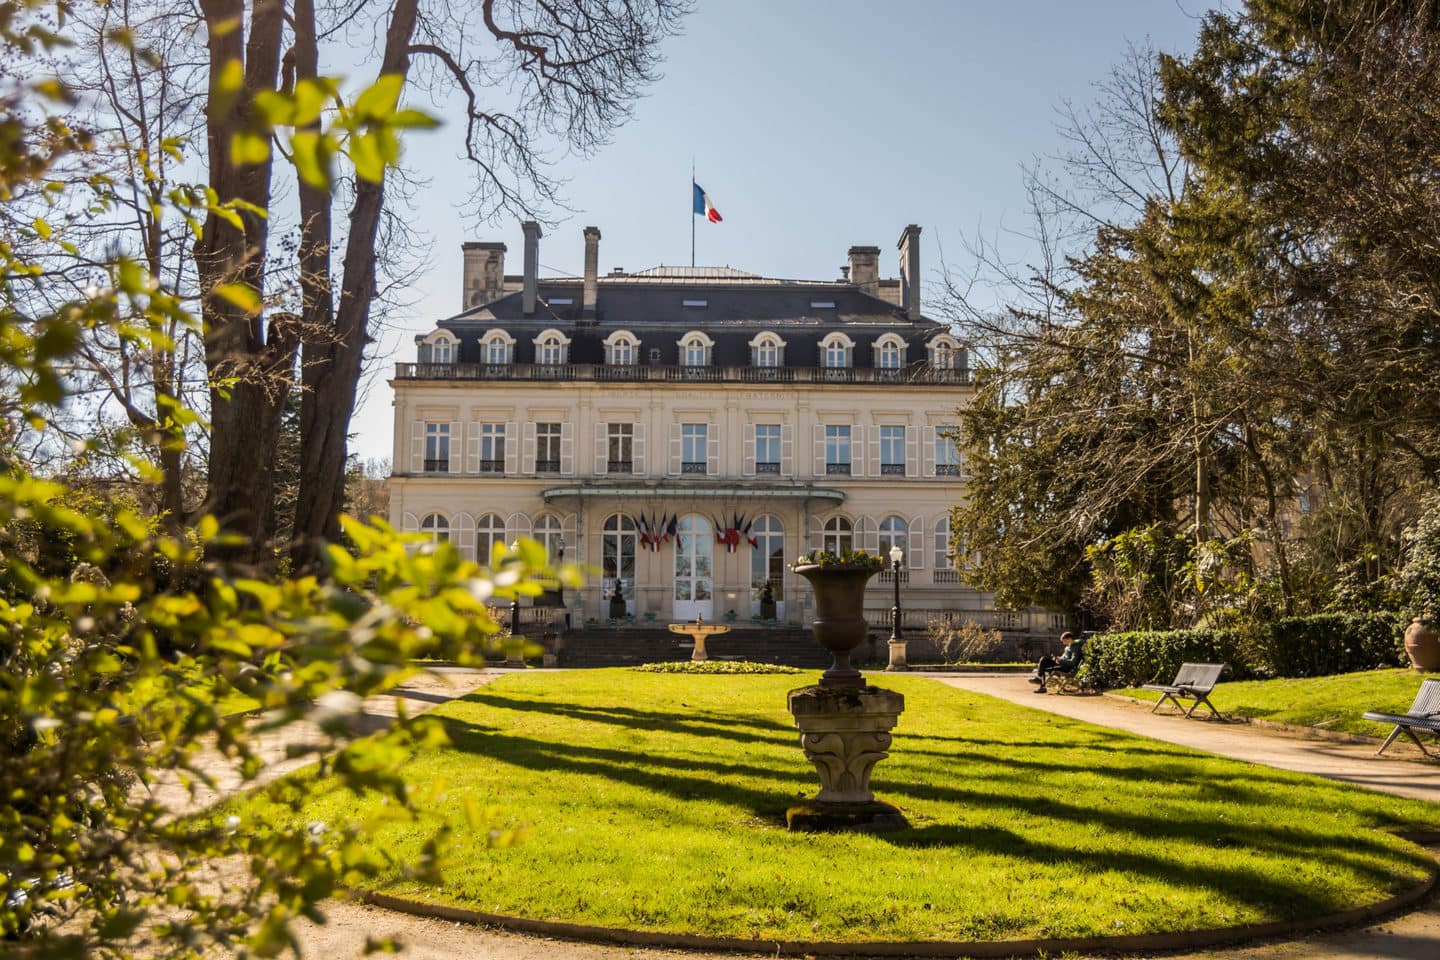 In the heart of the city of Epernay, the town hall and its superb park on the Avenue de Champagne.